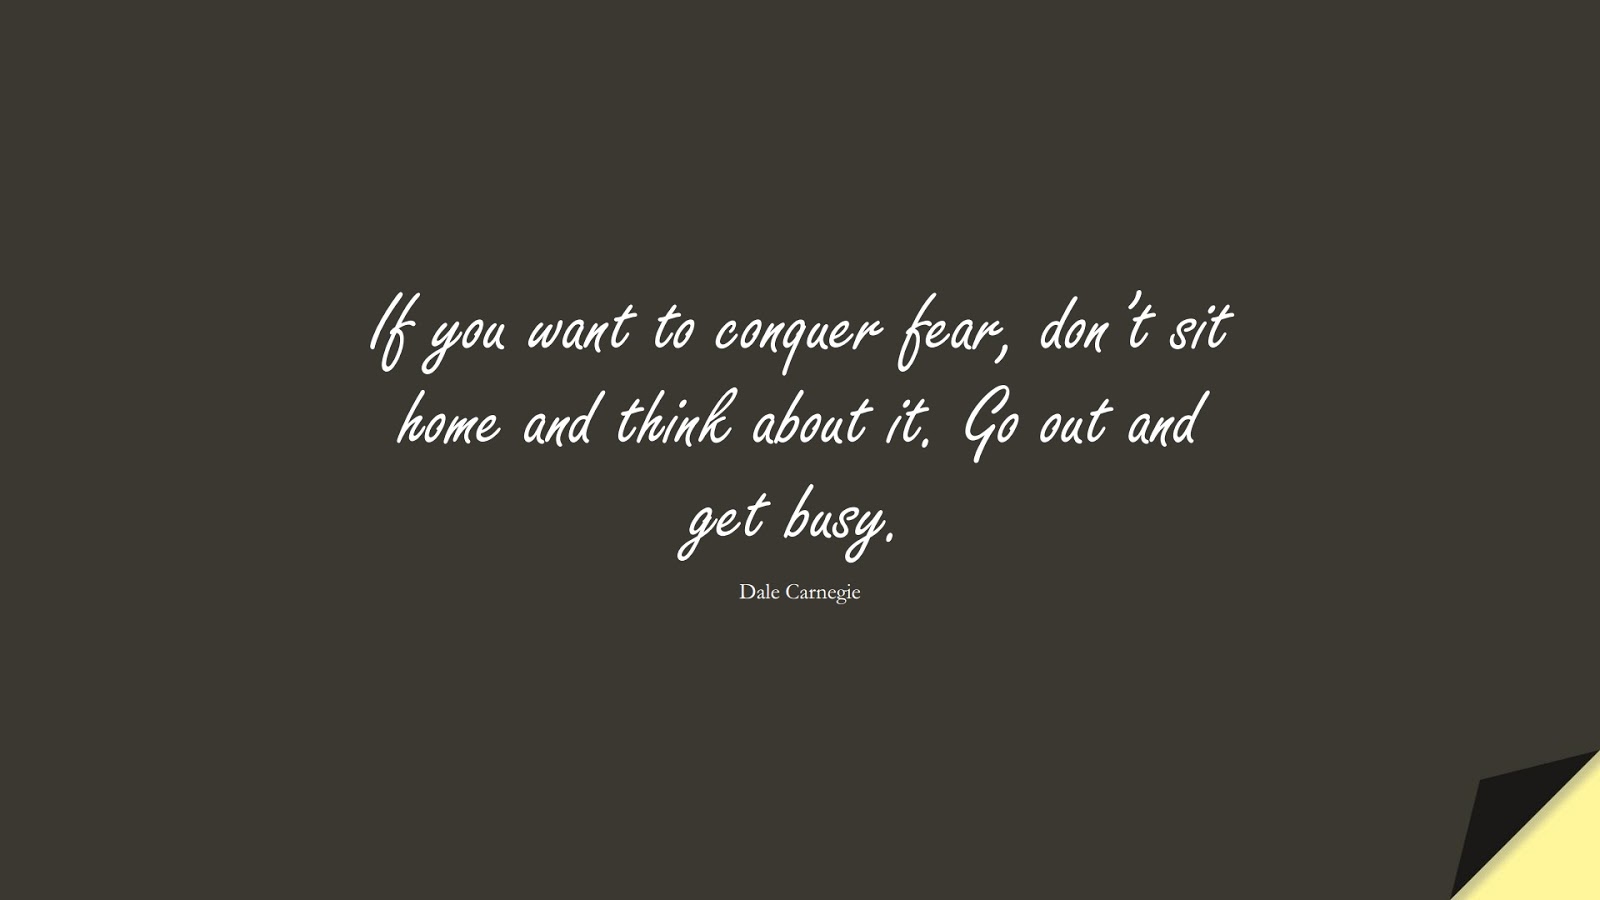 If you want to conquer fear, don’t sit home and think about it. Go out and get busy. (Dale Carnegie);  #FearQuotes